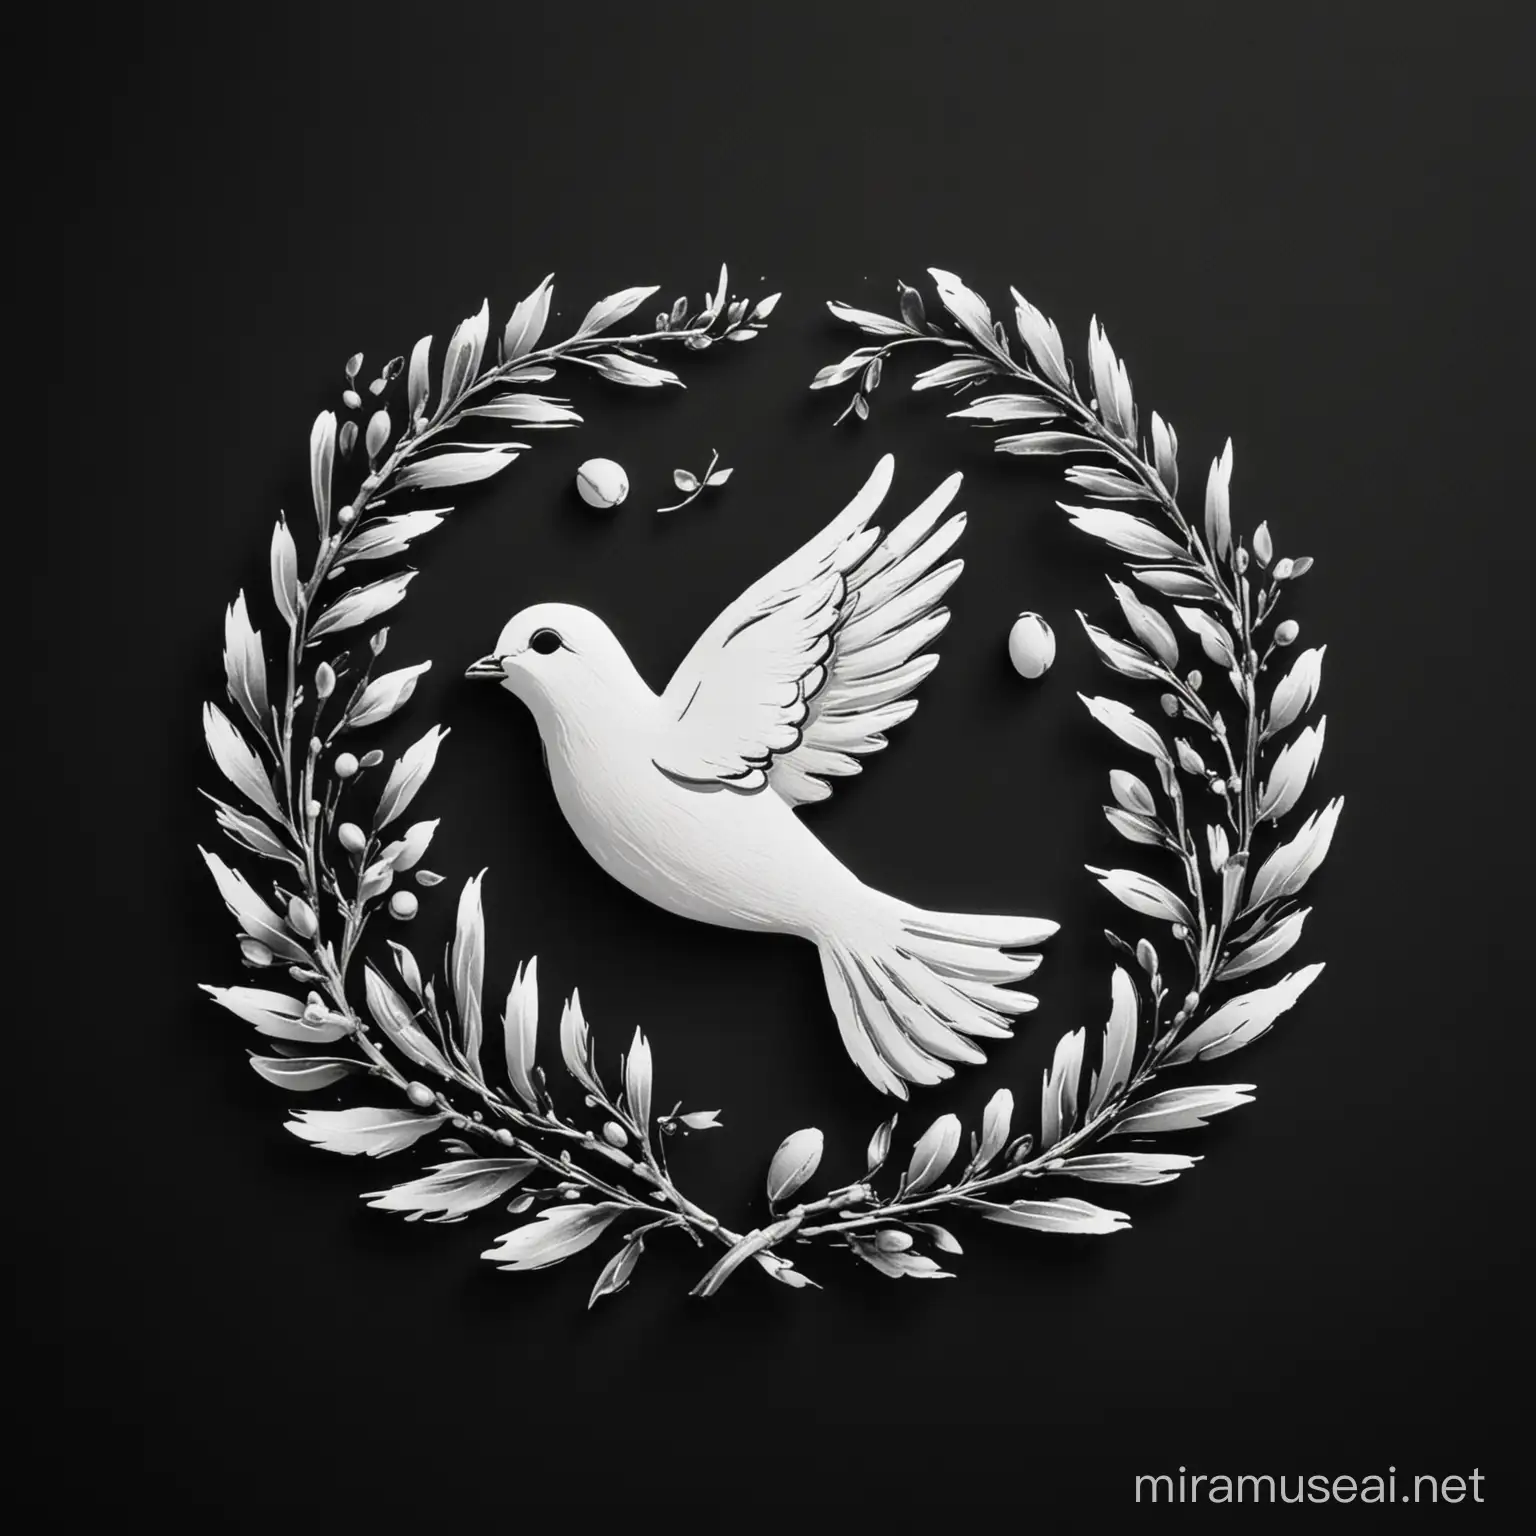 logo of an icon  dove with olive branches, black and white, black background